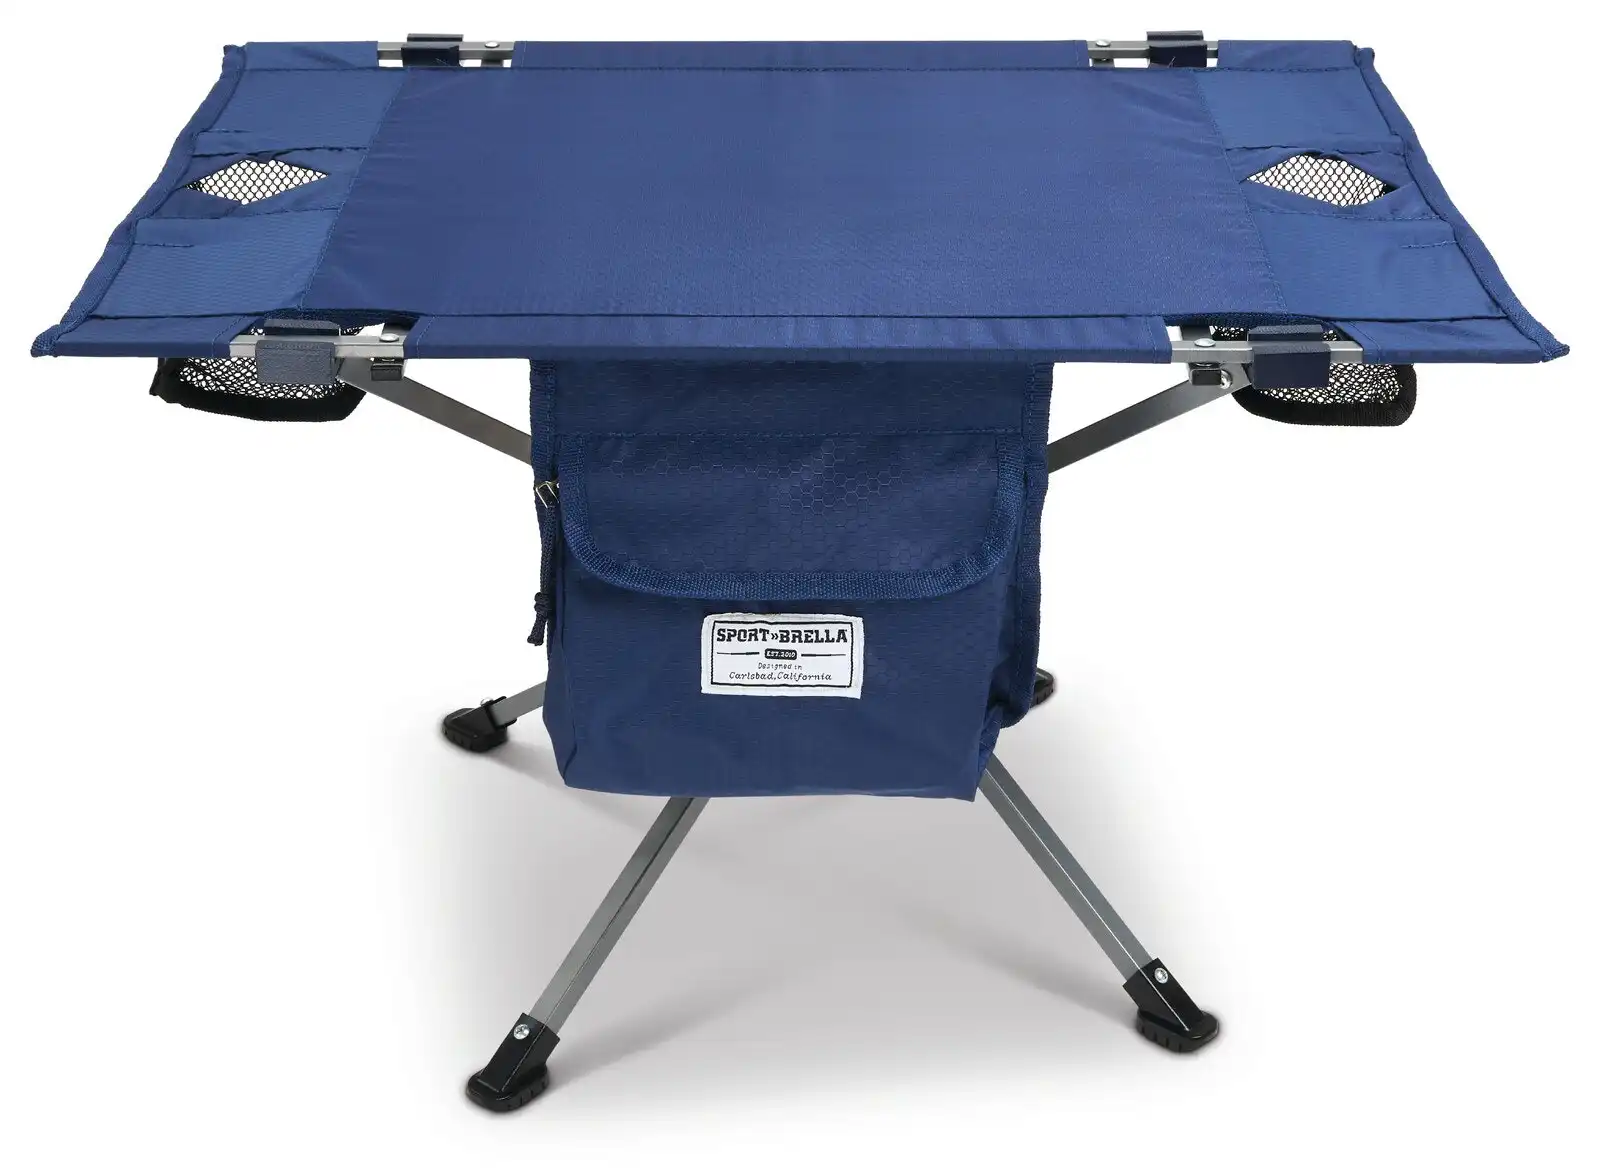 Sport Brella Sunsoul Portable Outdoor Beach/Camping Table w/ Cup Holder Navy